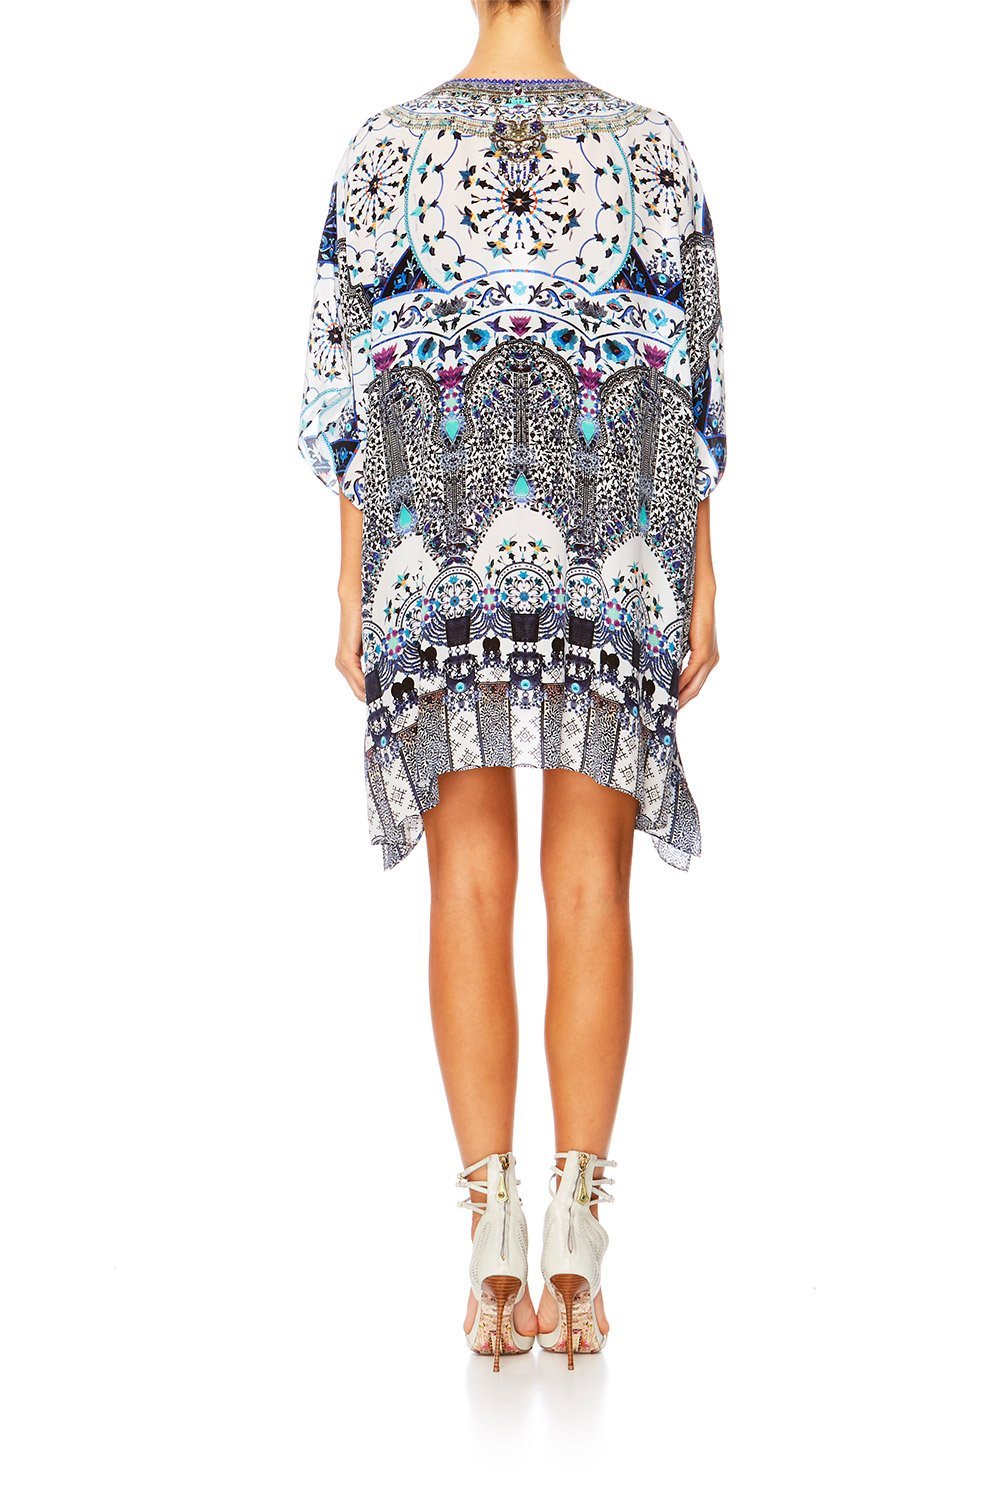 IN THE CONSTELLATIONS SHORT LACE UP KAFTAN